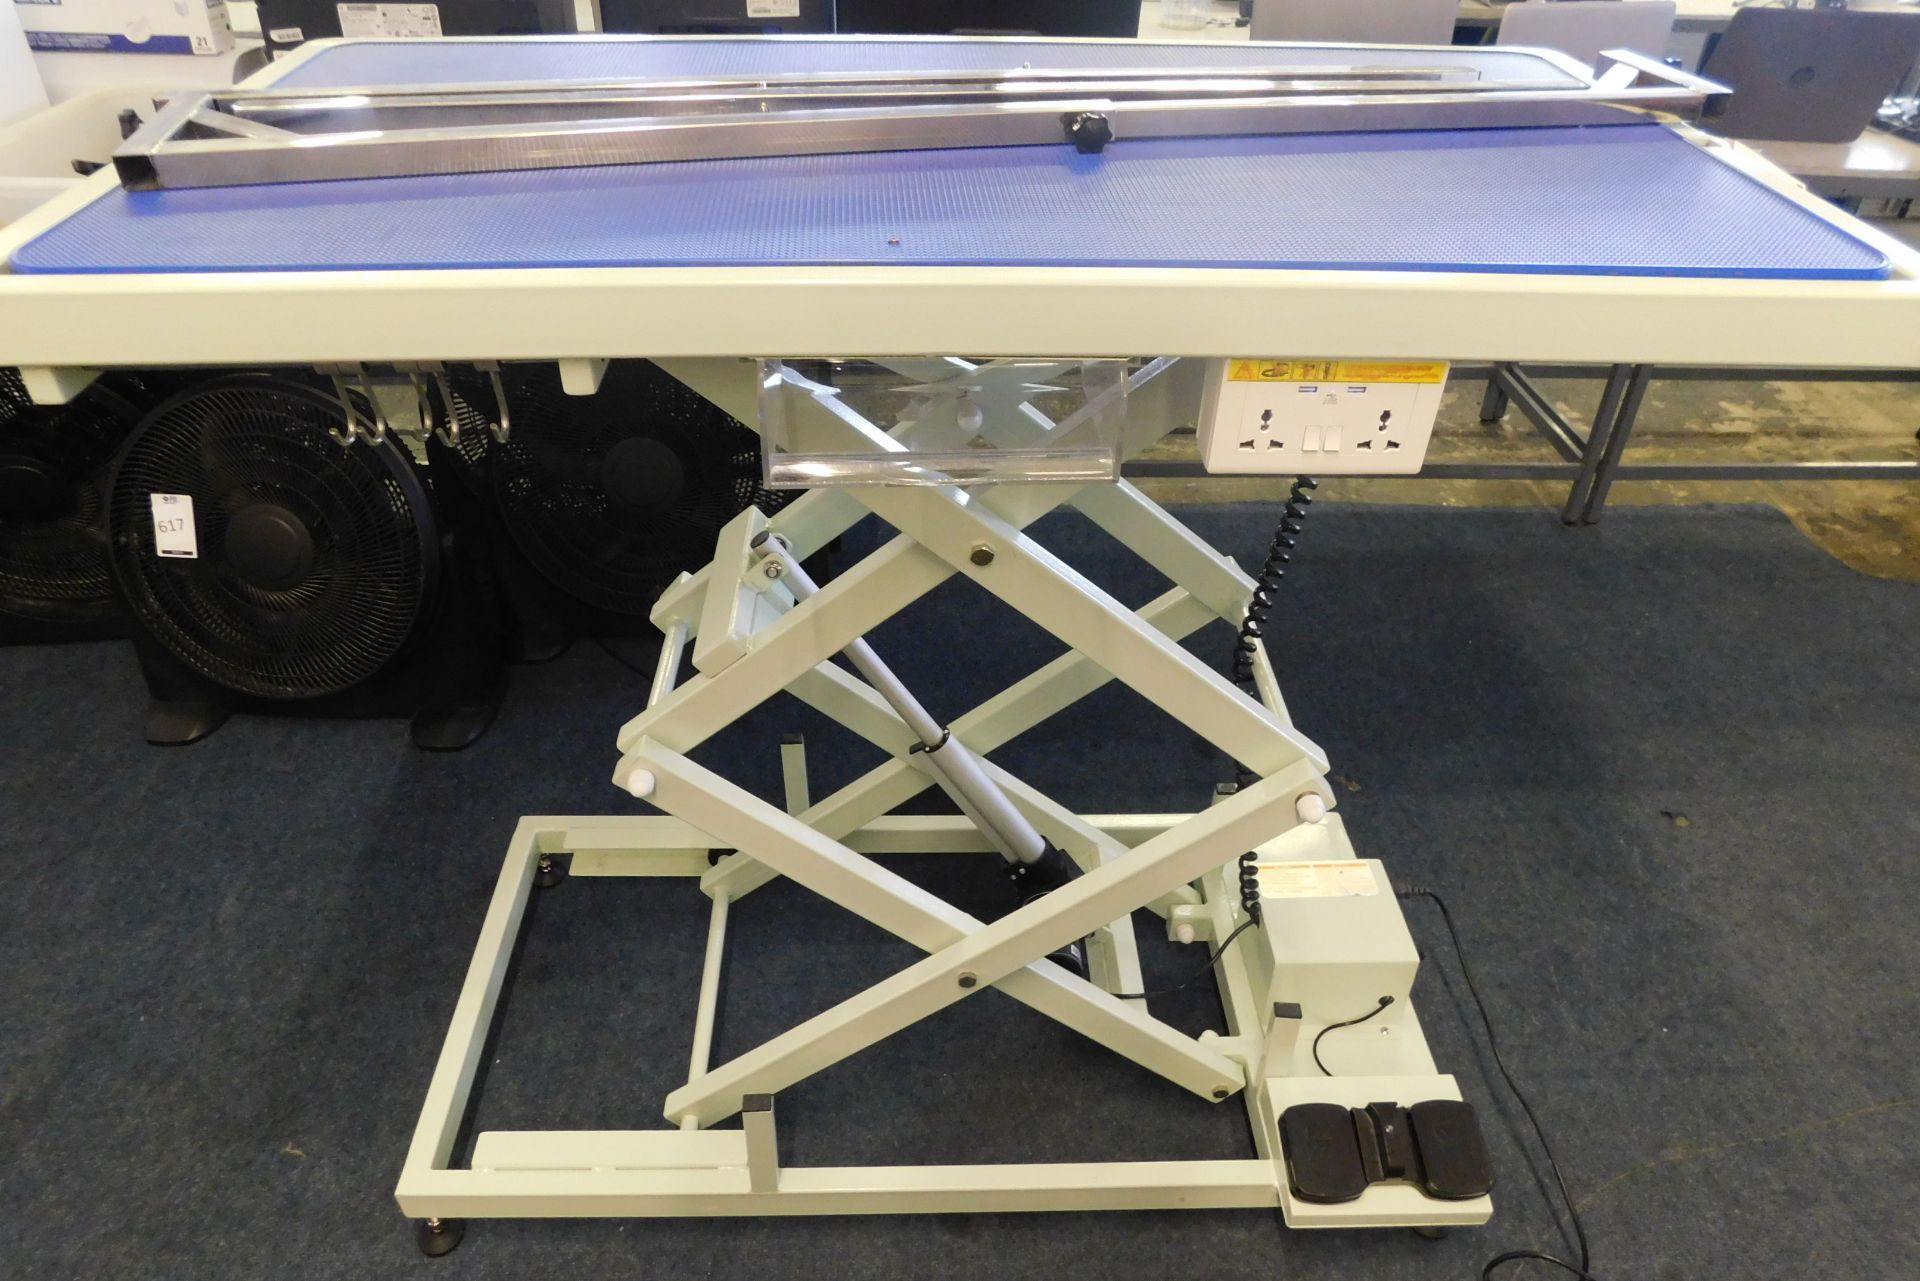 Unbadged Electric Dog Grooming Hydraulic Table (Location: Stockport. Please Refer to General Notes) - Image 5 of 6